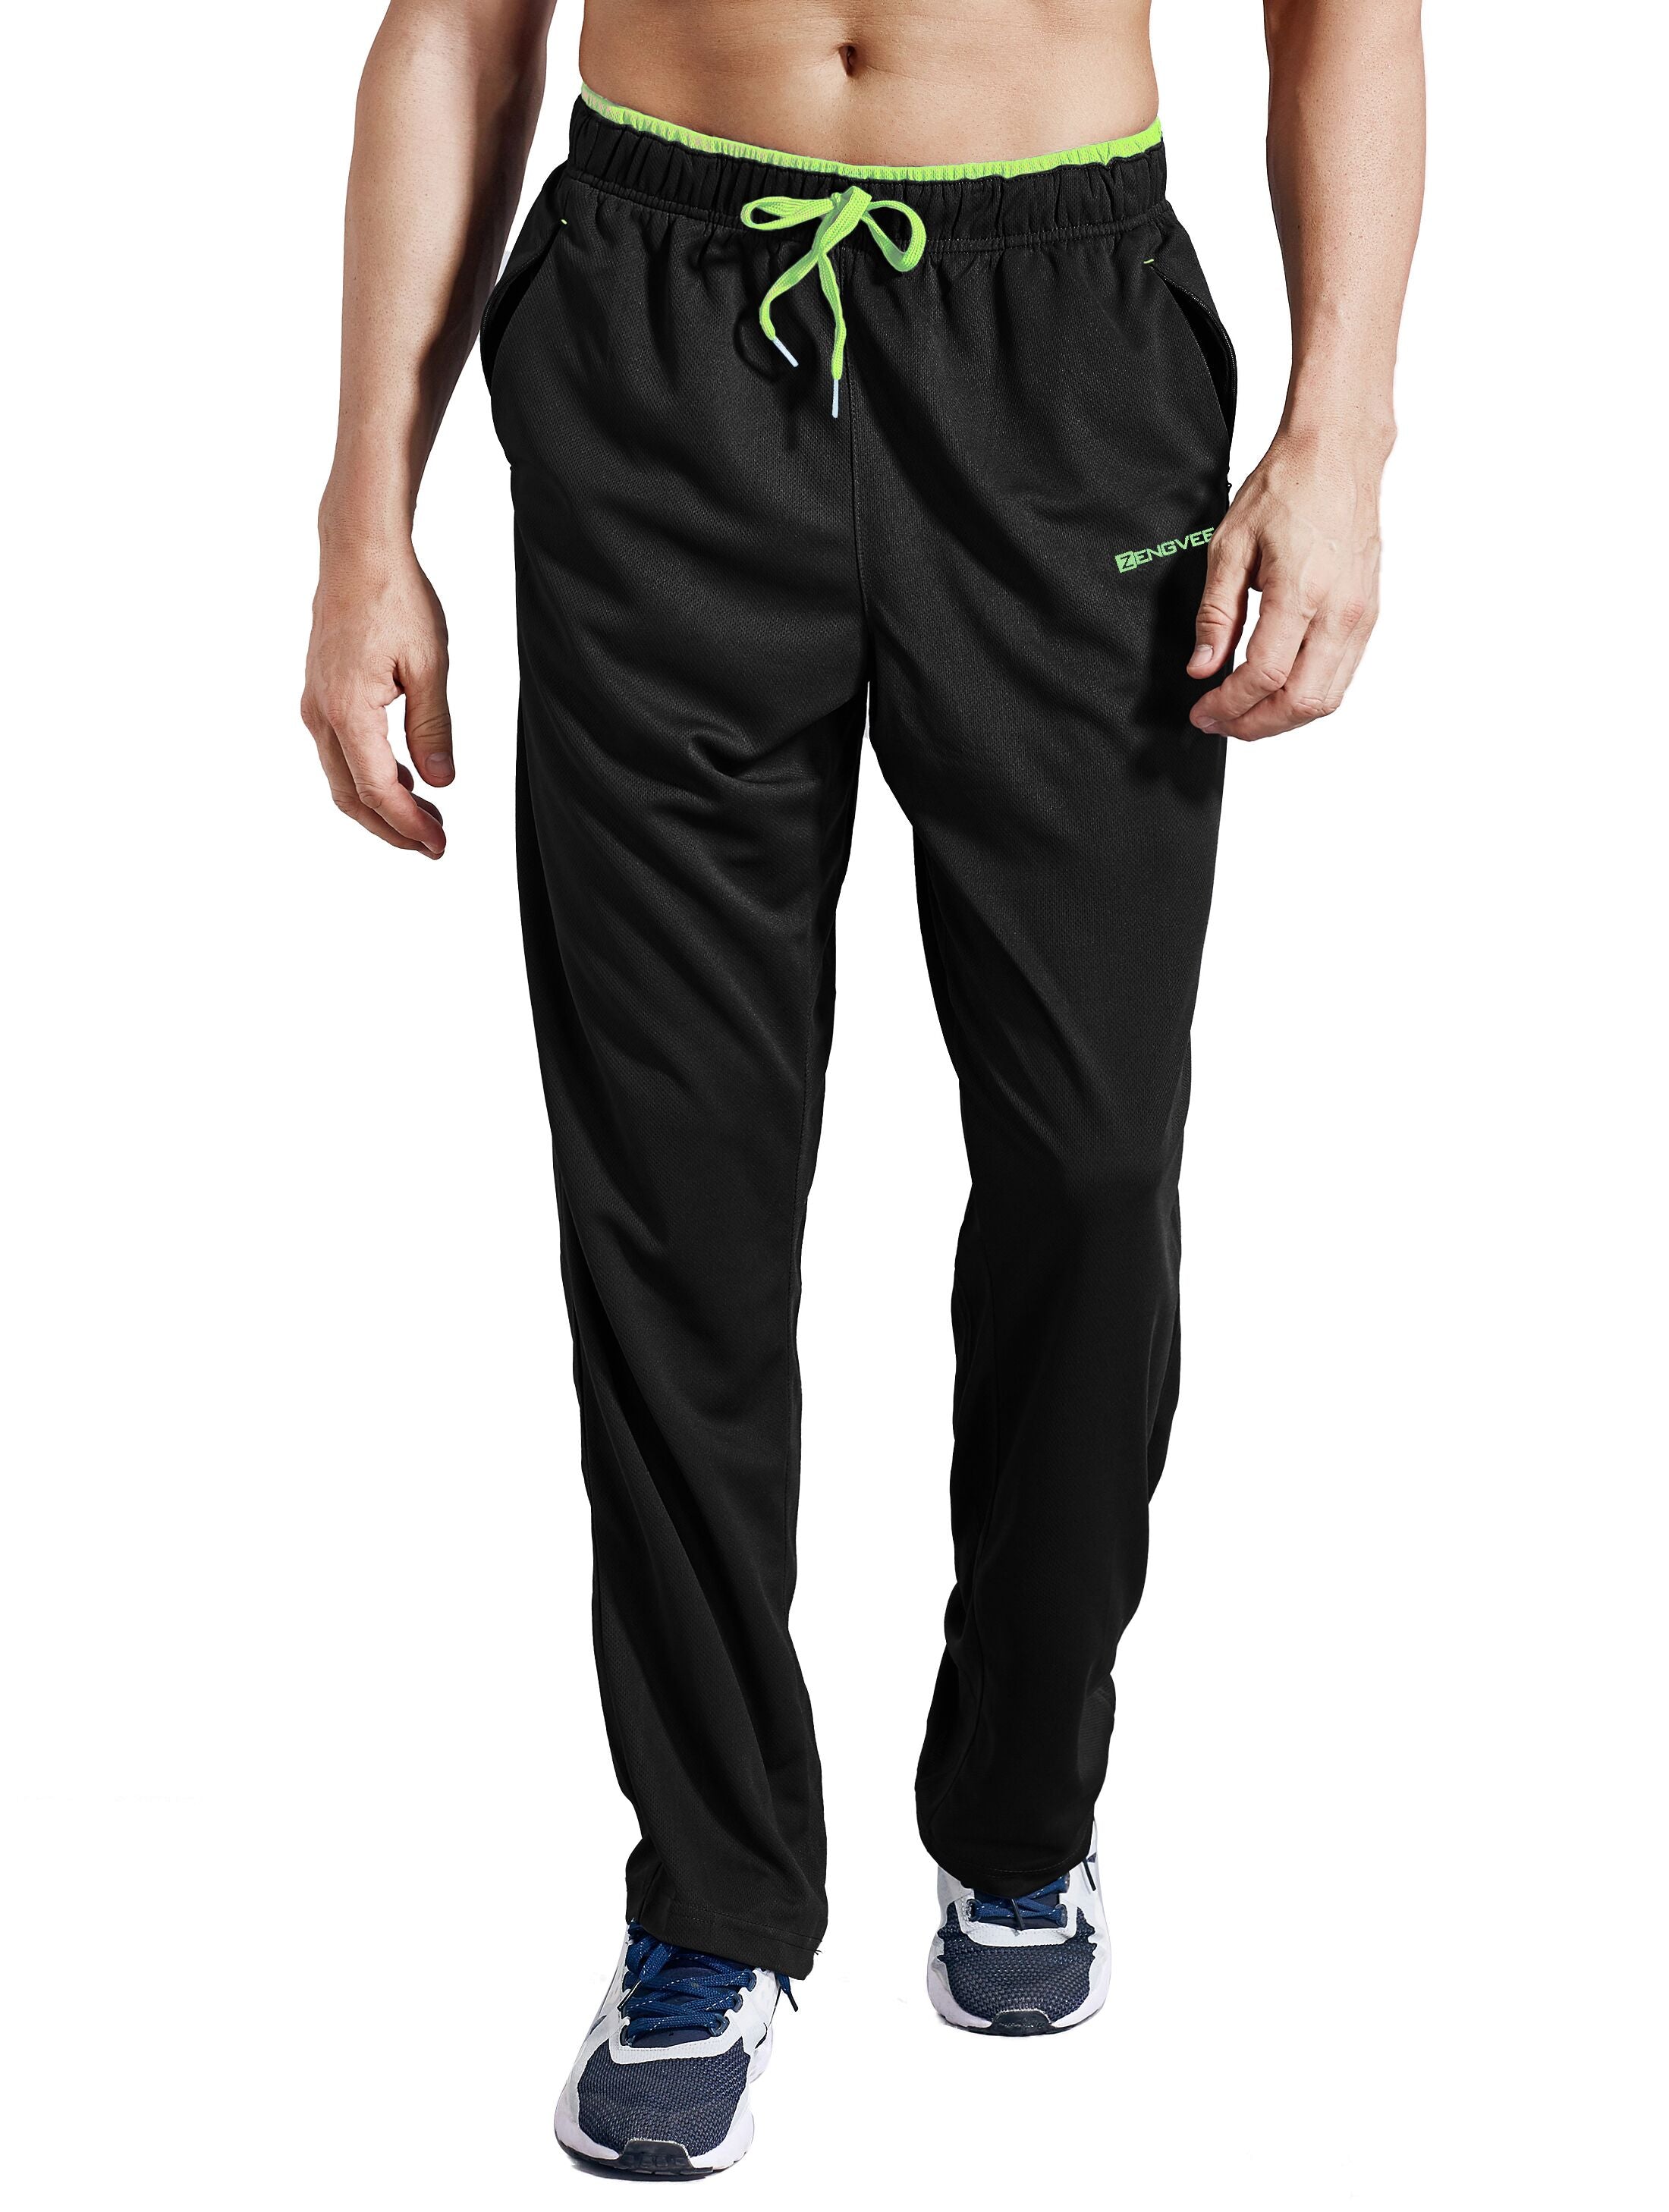  KouKou Men's Sweatpants with Zipper Pockets Open Bottom  Athletic Pants for Men Running Jogging Workout Gym 3pack S : Clothing,  Shoes & Jewelry